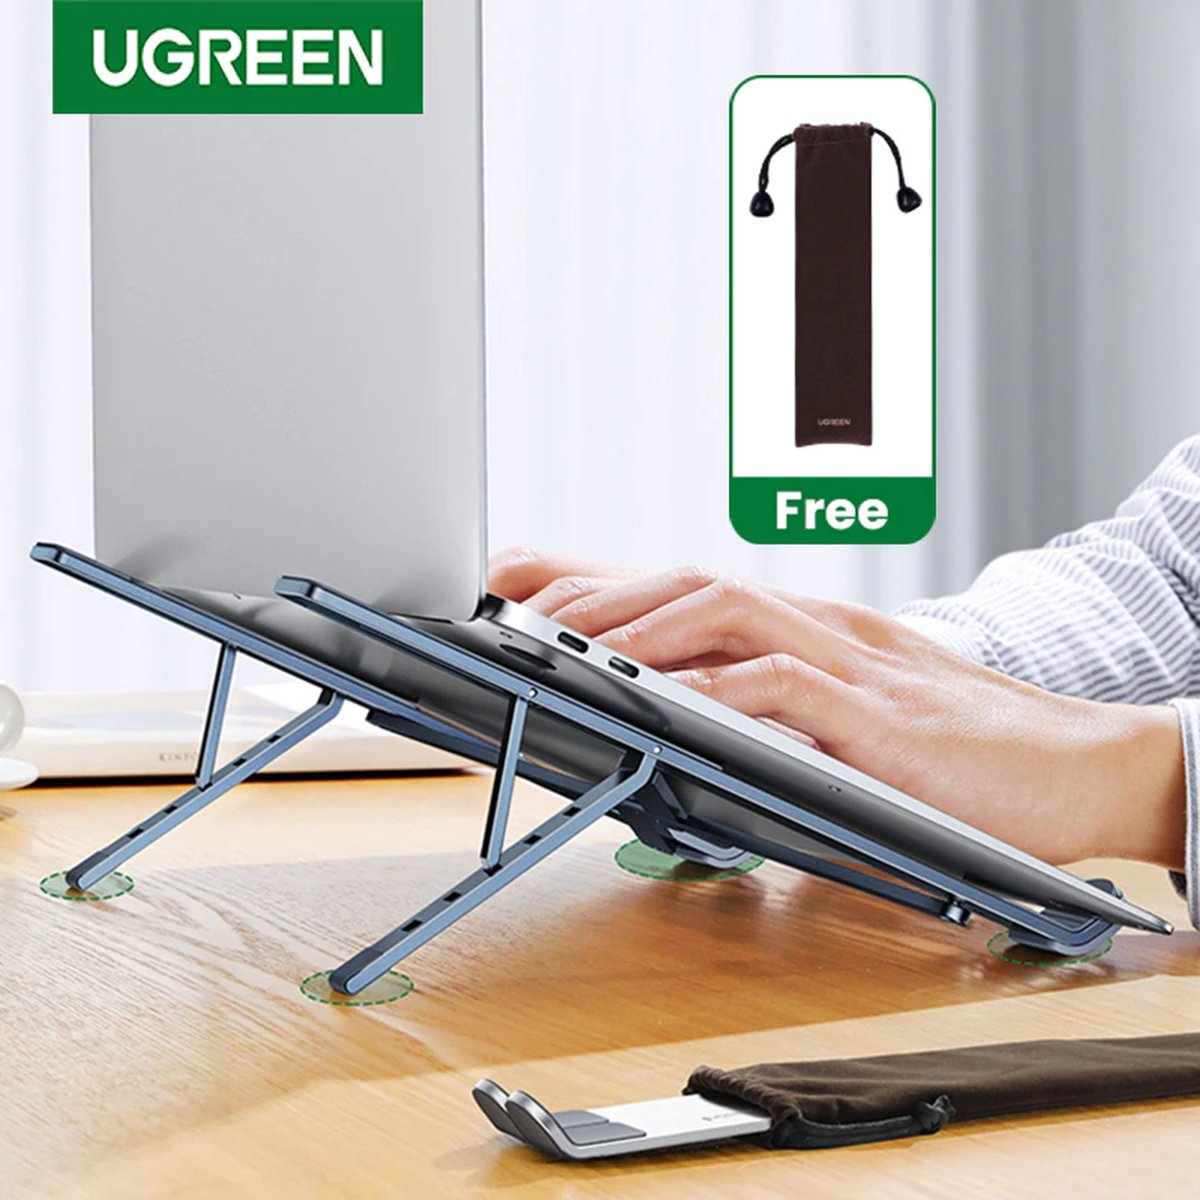 UGreen Laptop Stand - Tablet Stand - Laptop Stand Houder - Aluminium Stand - 5-Level Adjustable Stand